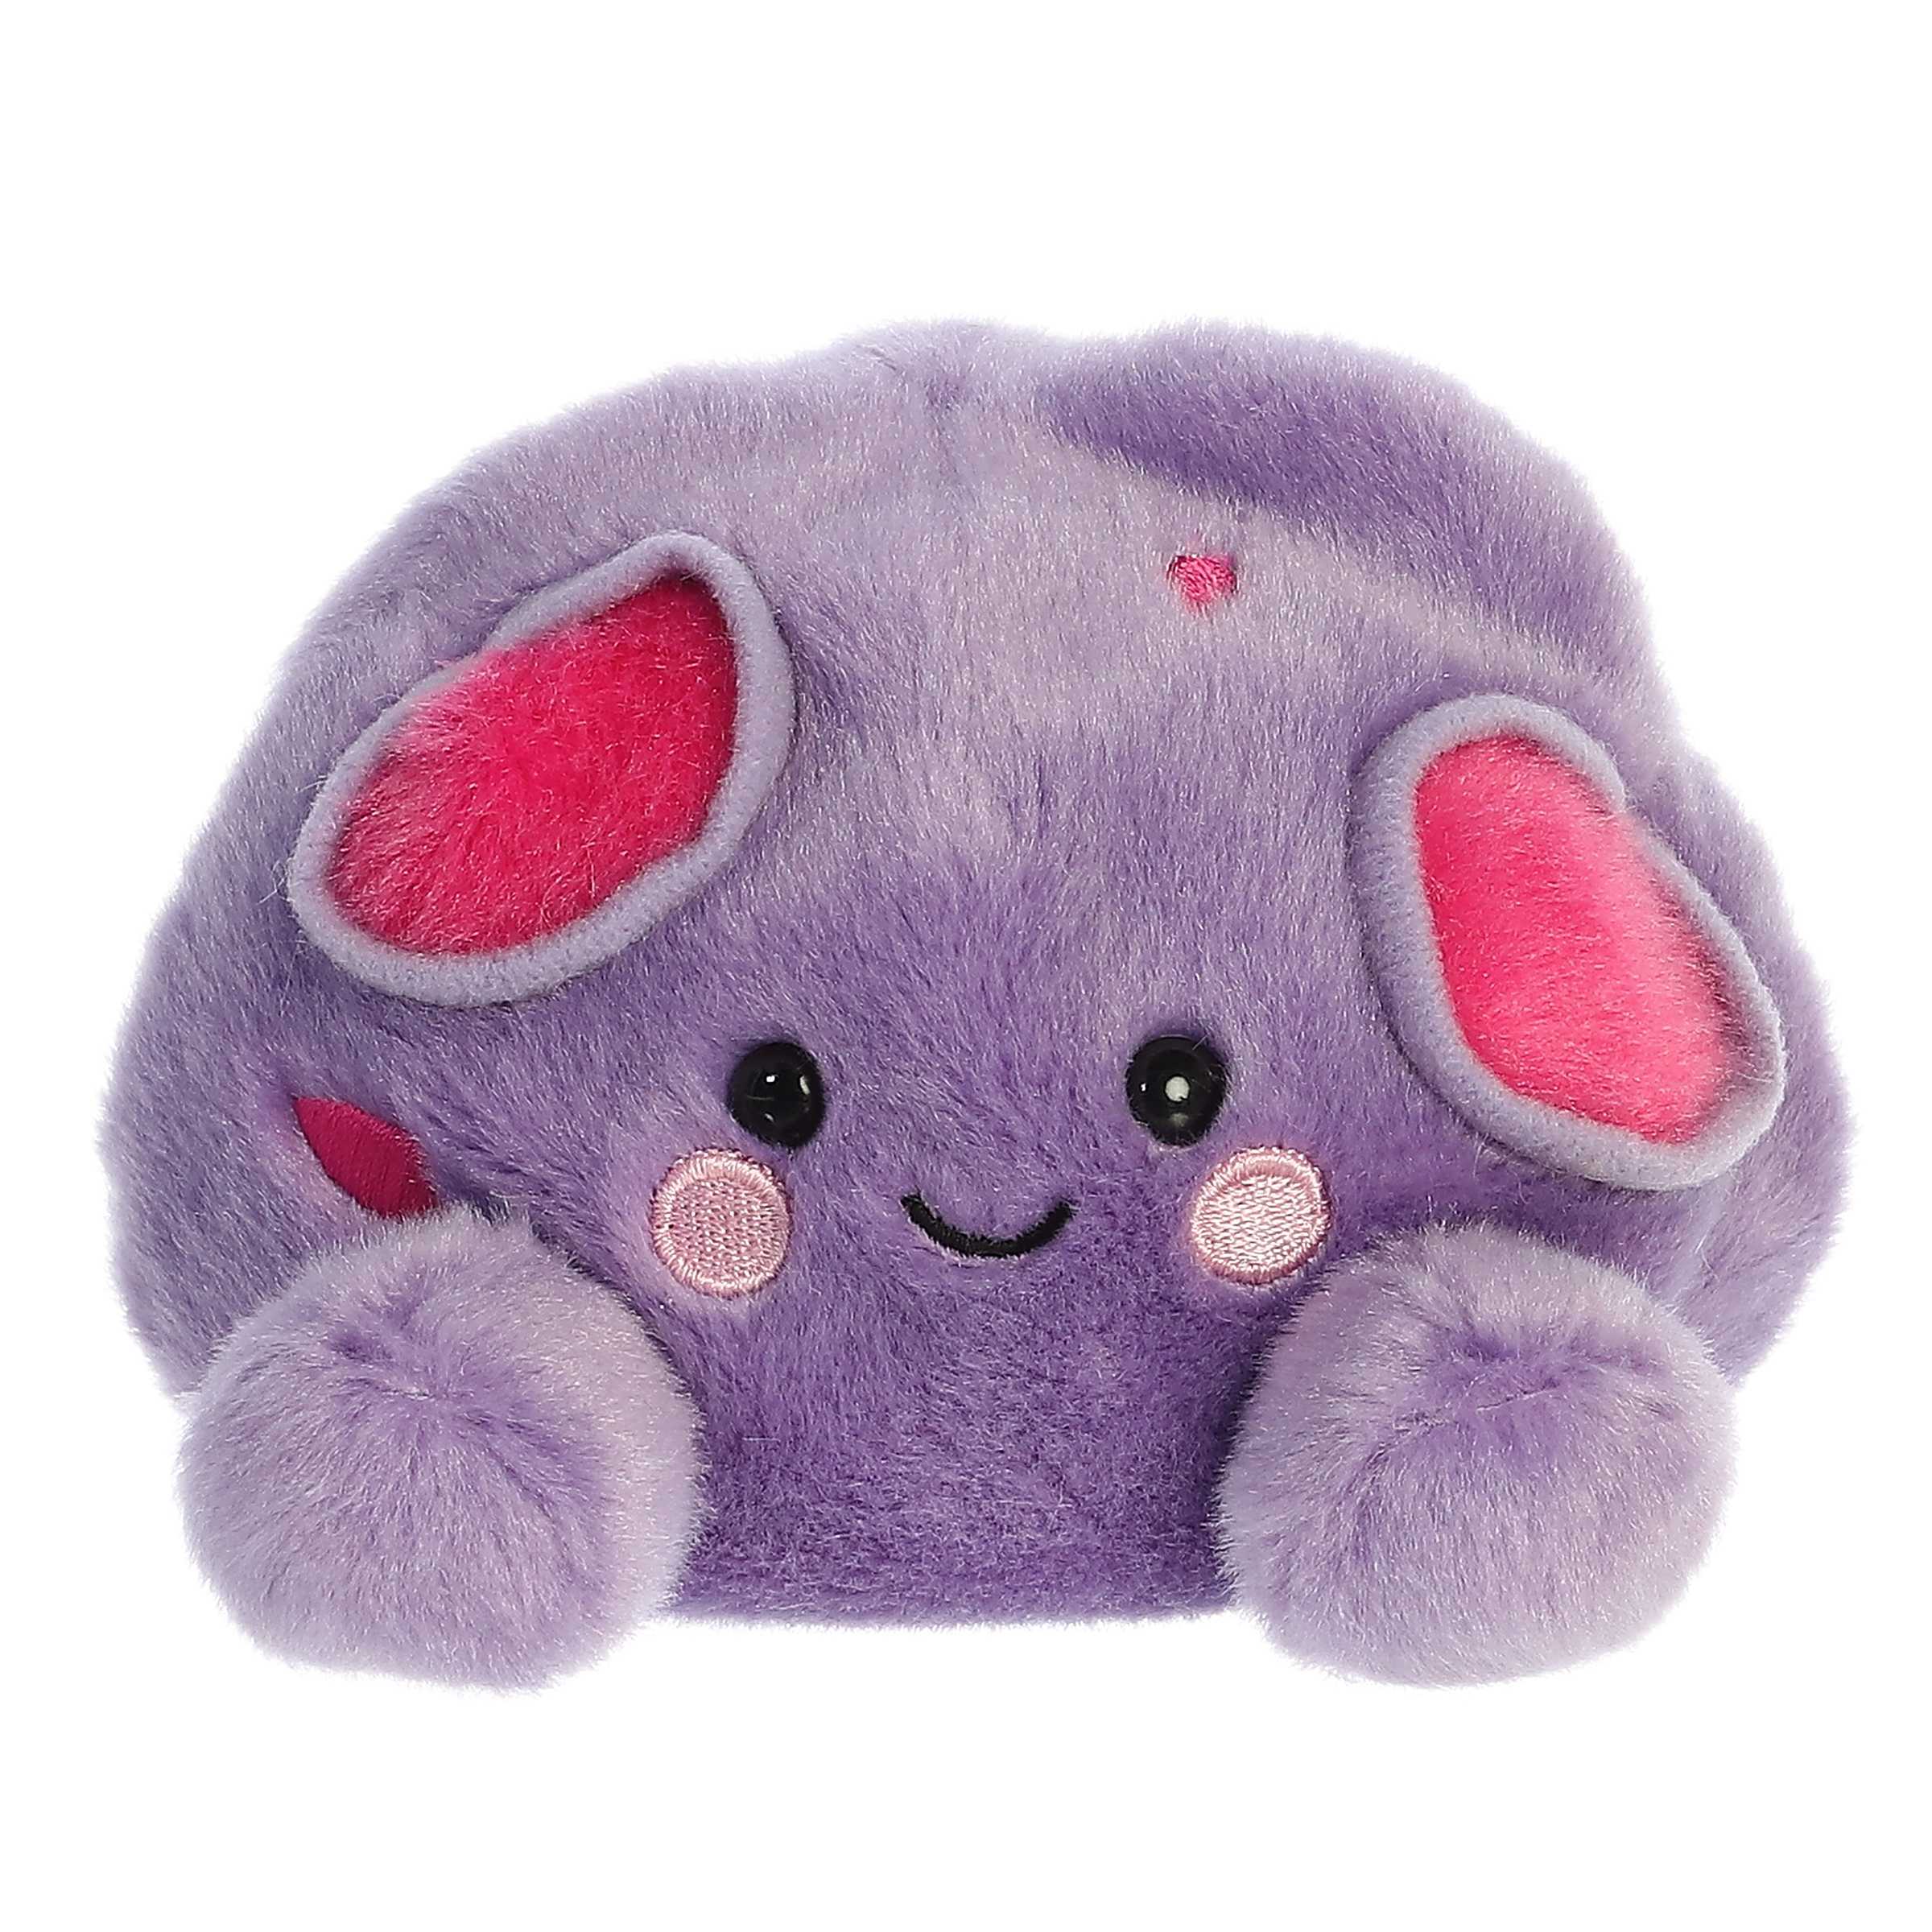 Cal Meteor is a plushie of cosmic cuteness, with a soft, velvety purple body and charmingly bright pink craters!